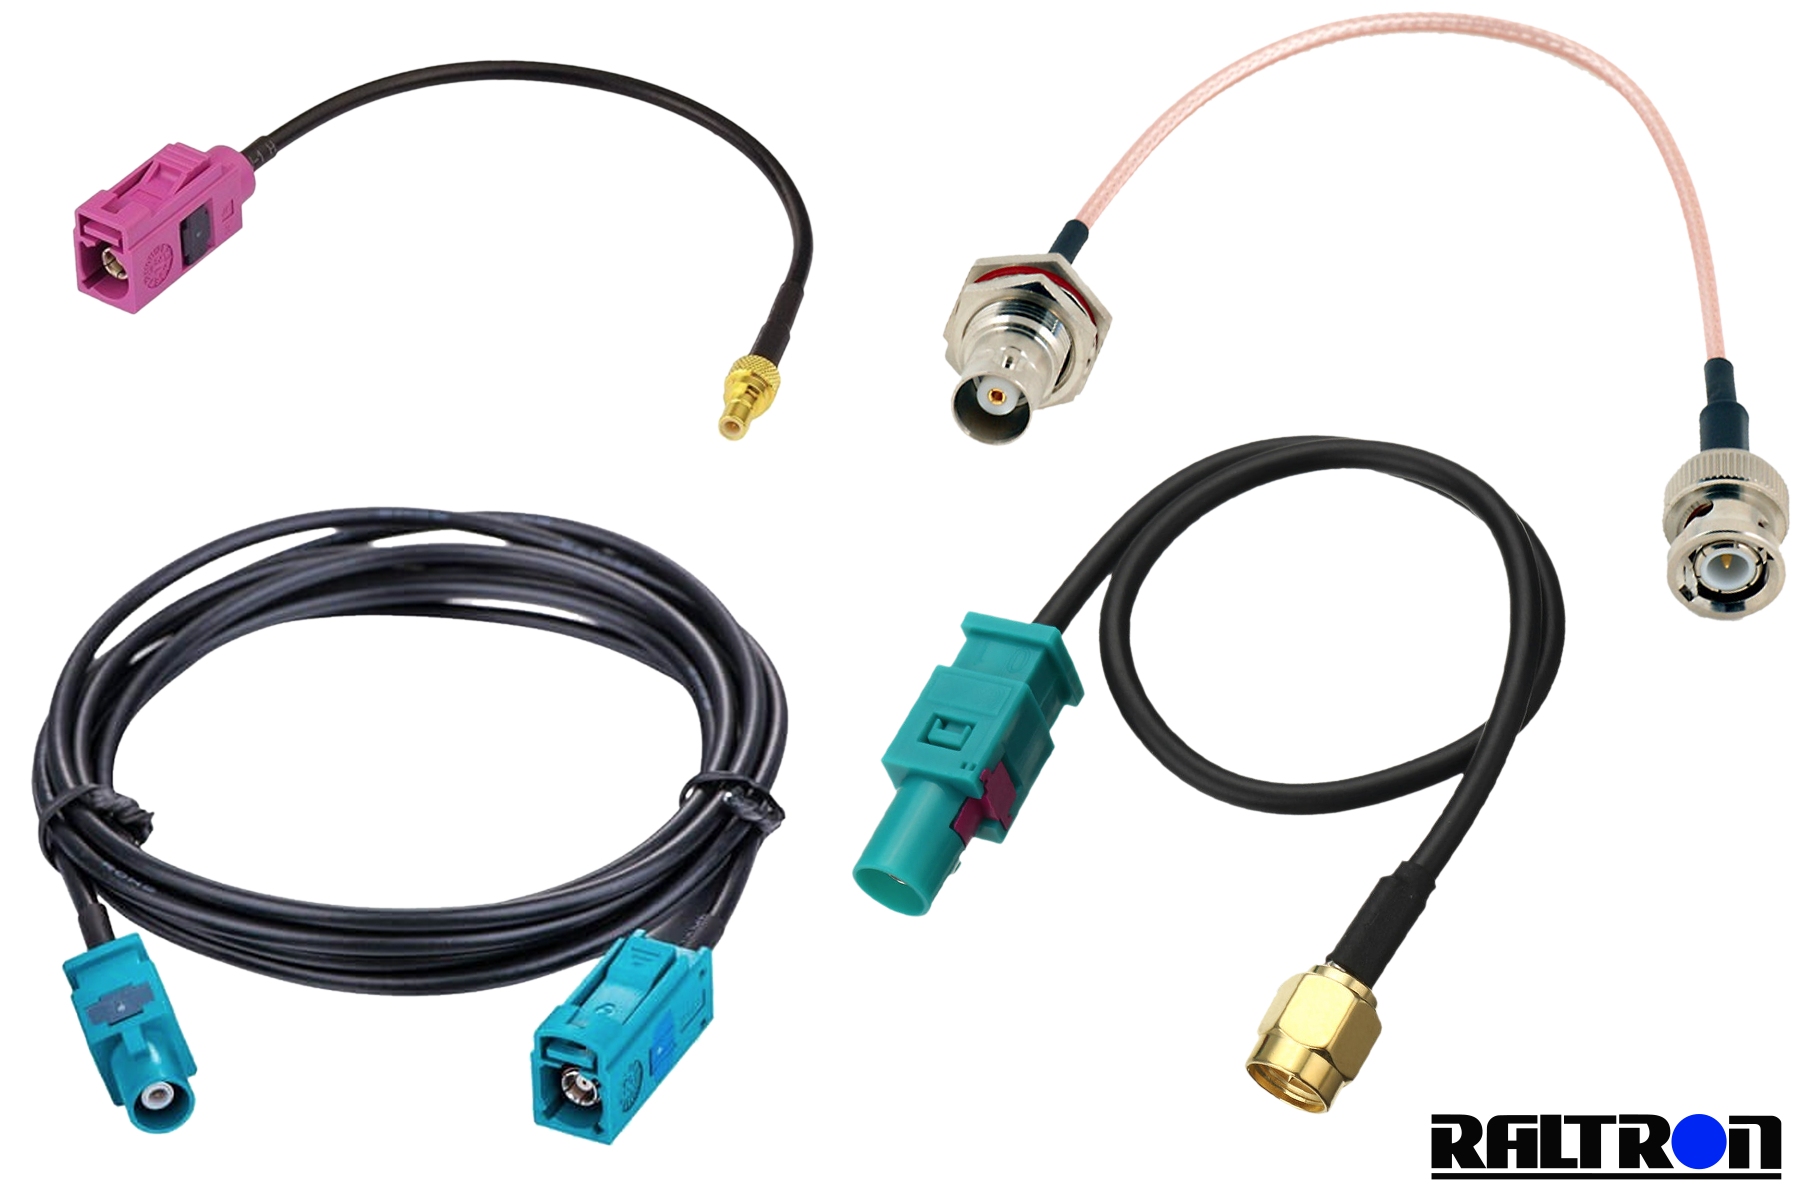 Raltron Expands RF Cable Assembly Product Offering